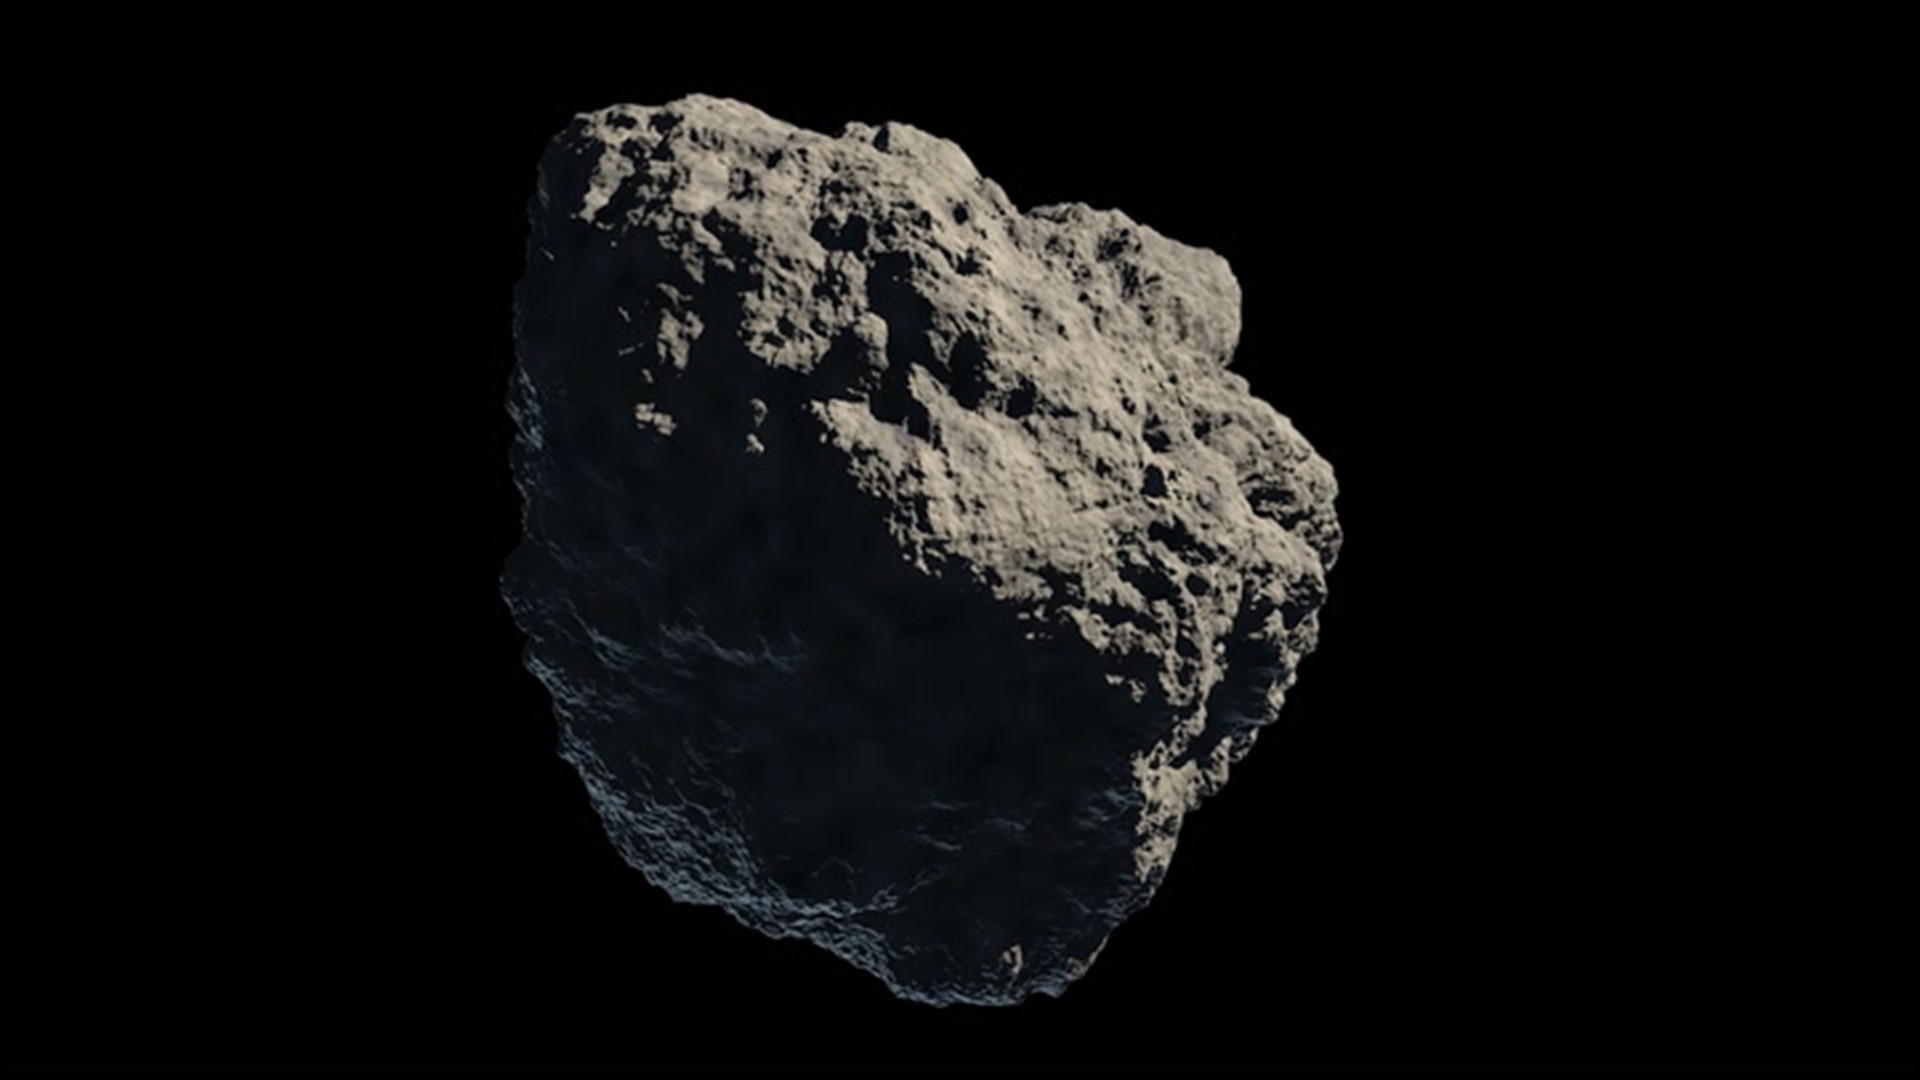 Asteroid 2002 NN4 is expected to make a close flyby of our planet this weekend. The size of this asteroid was enough to grab NASA's attention.